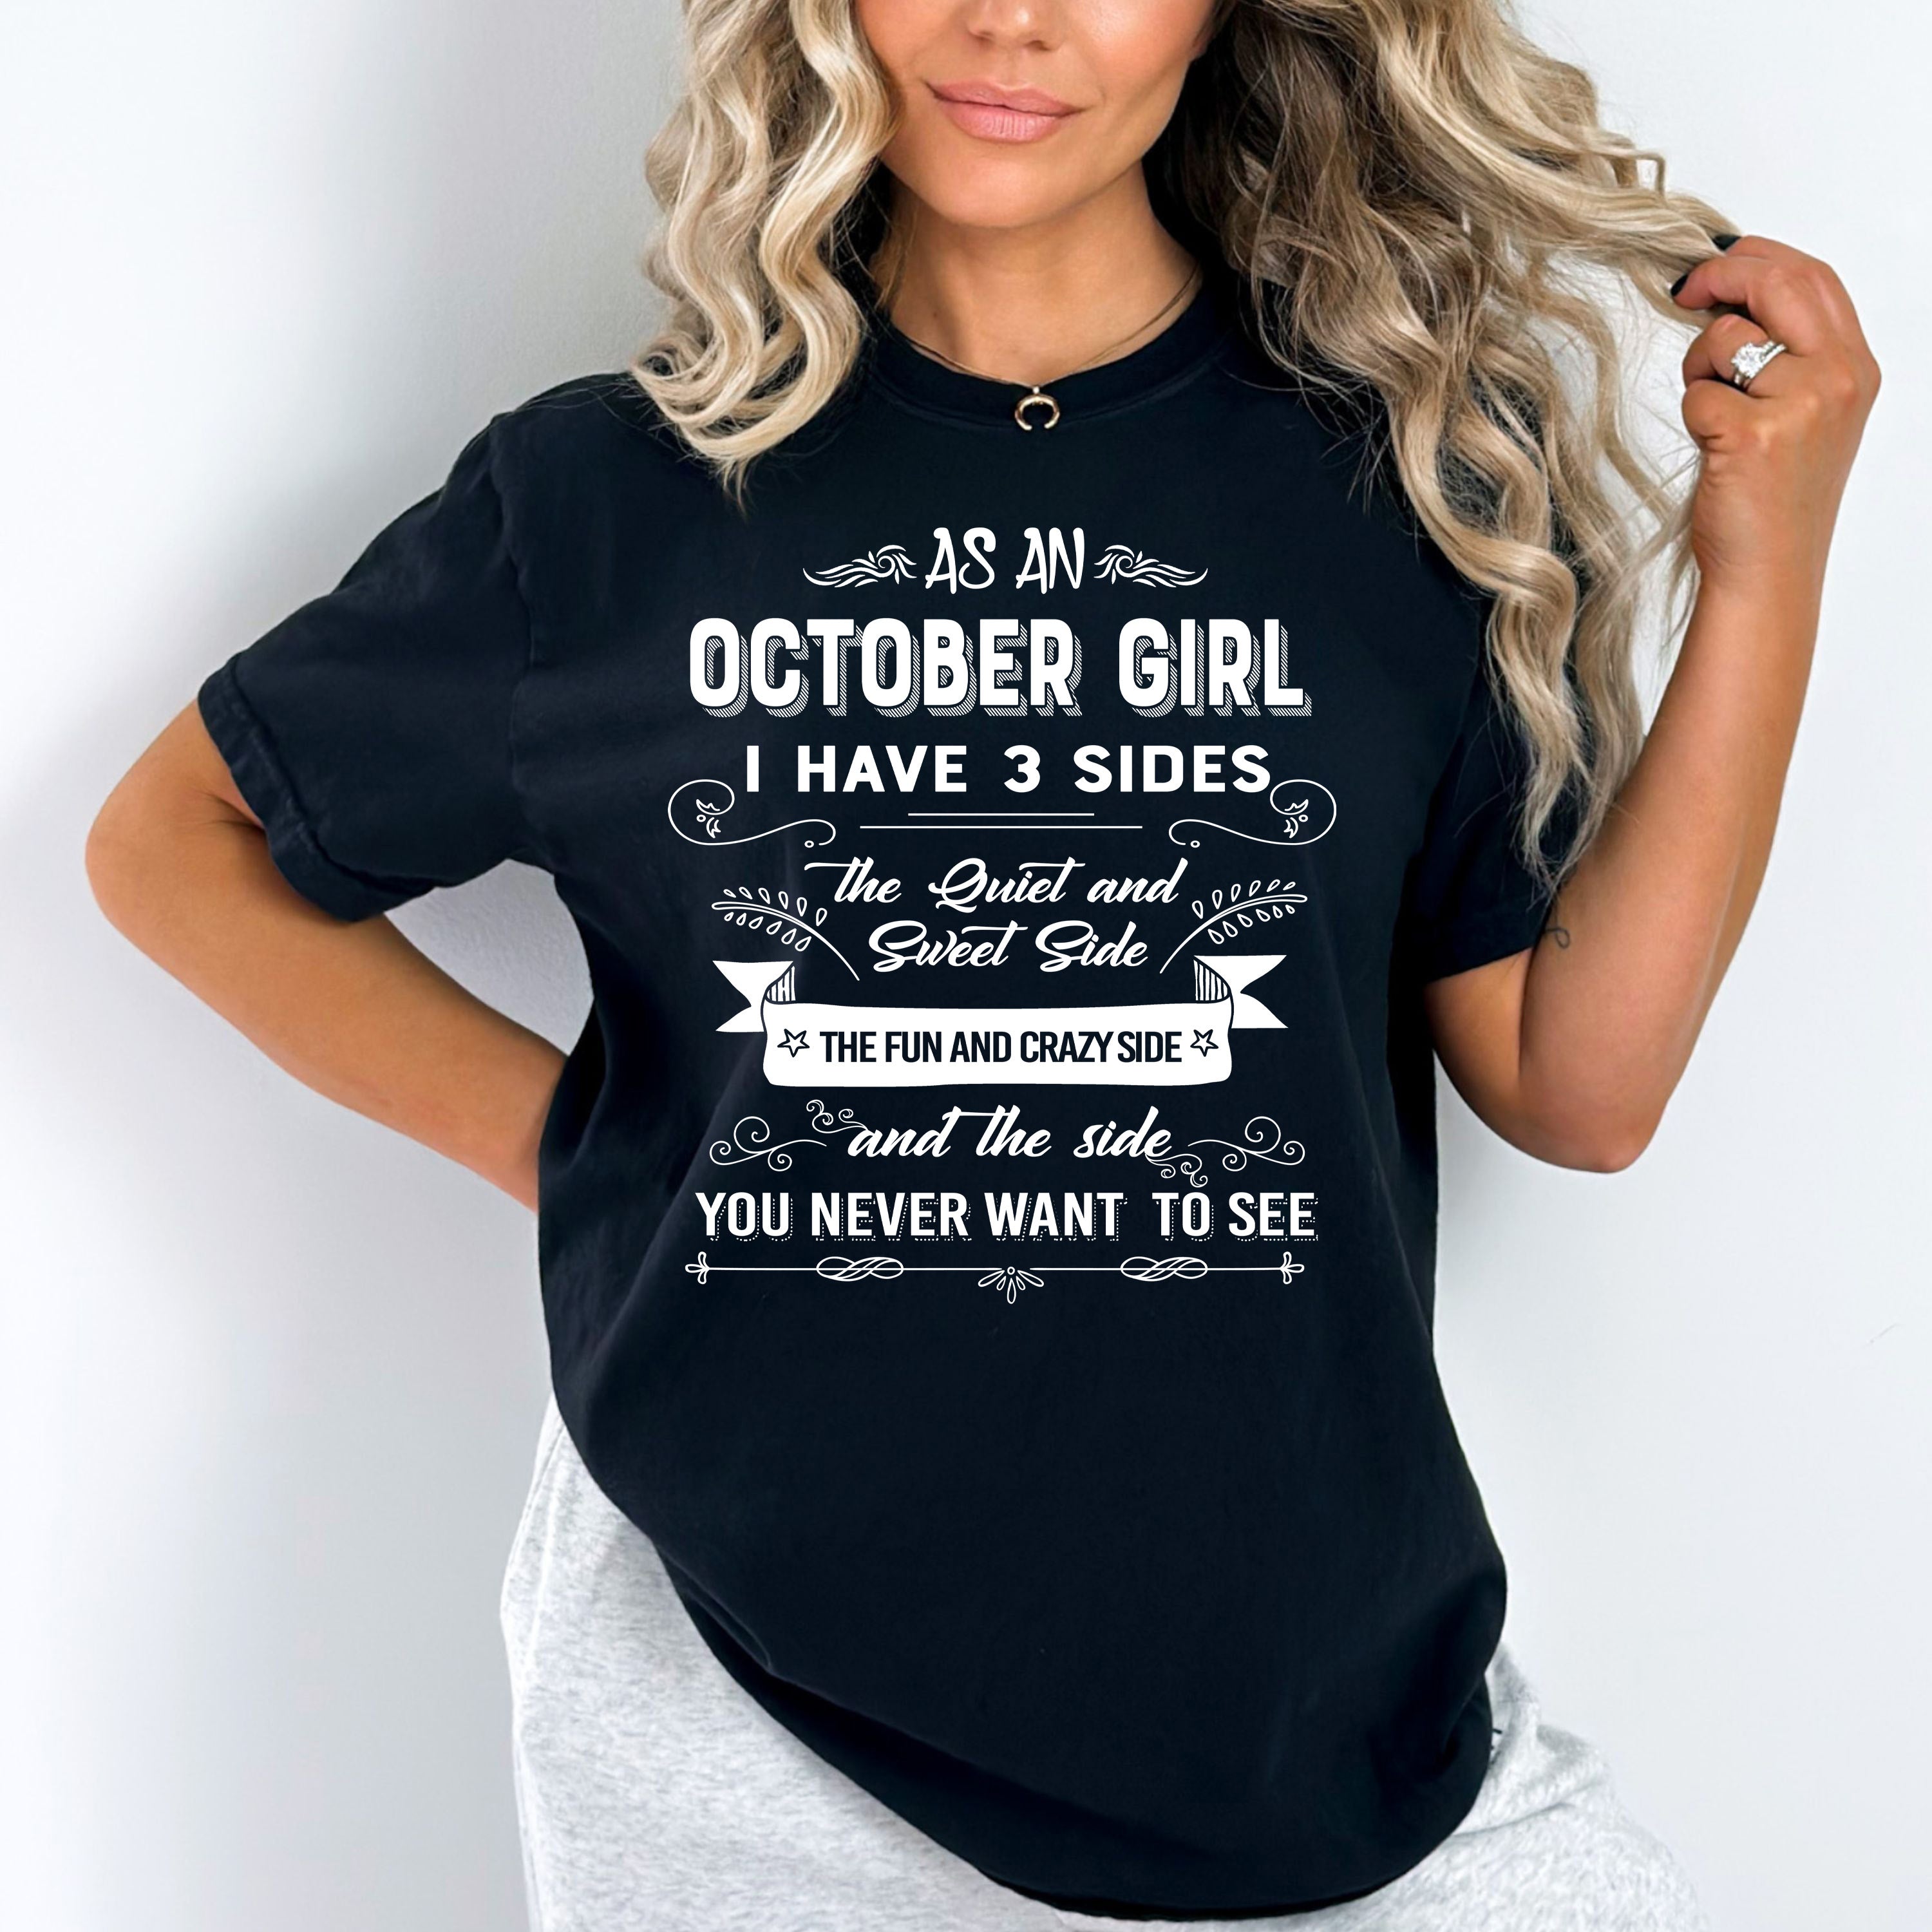 "As a October Girl I have 3 Sides"